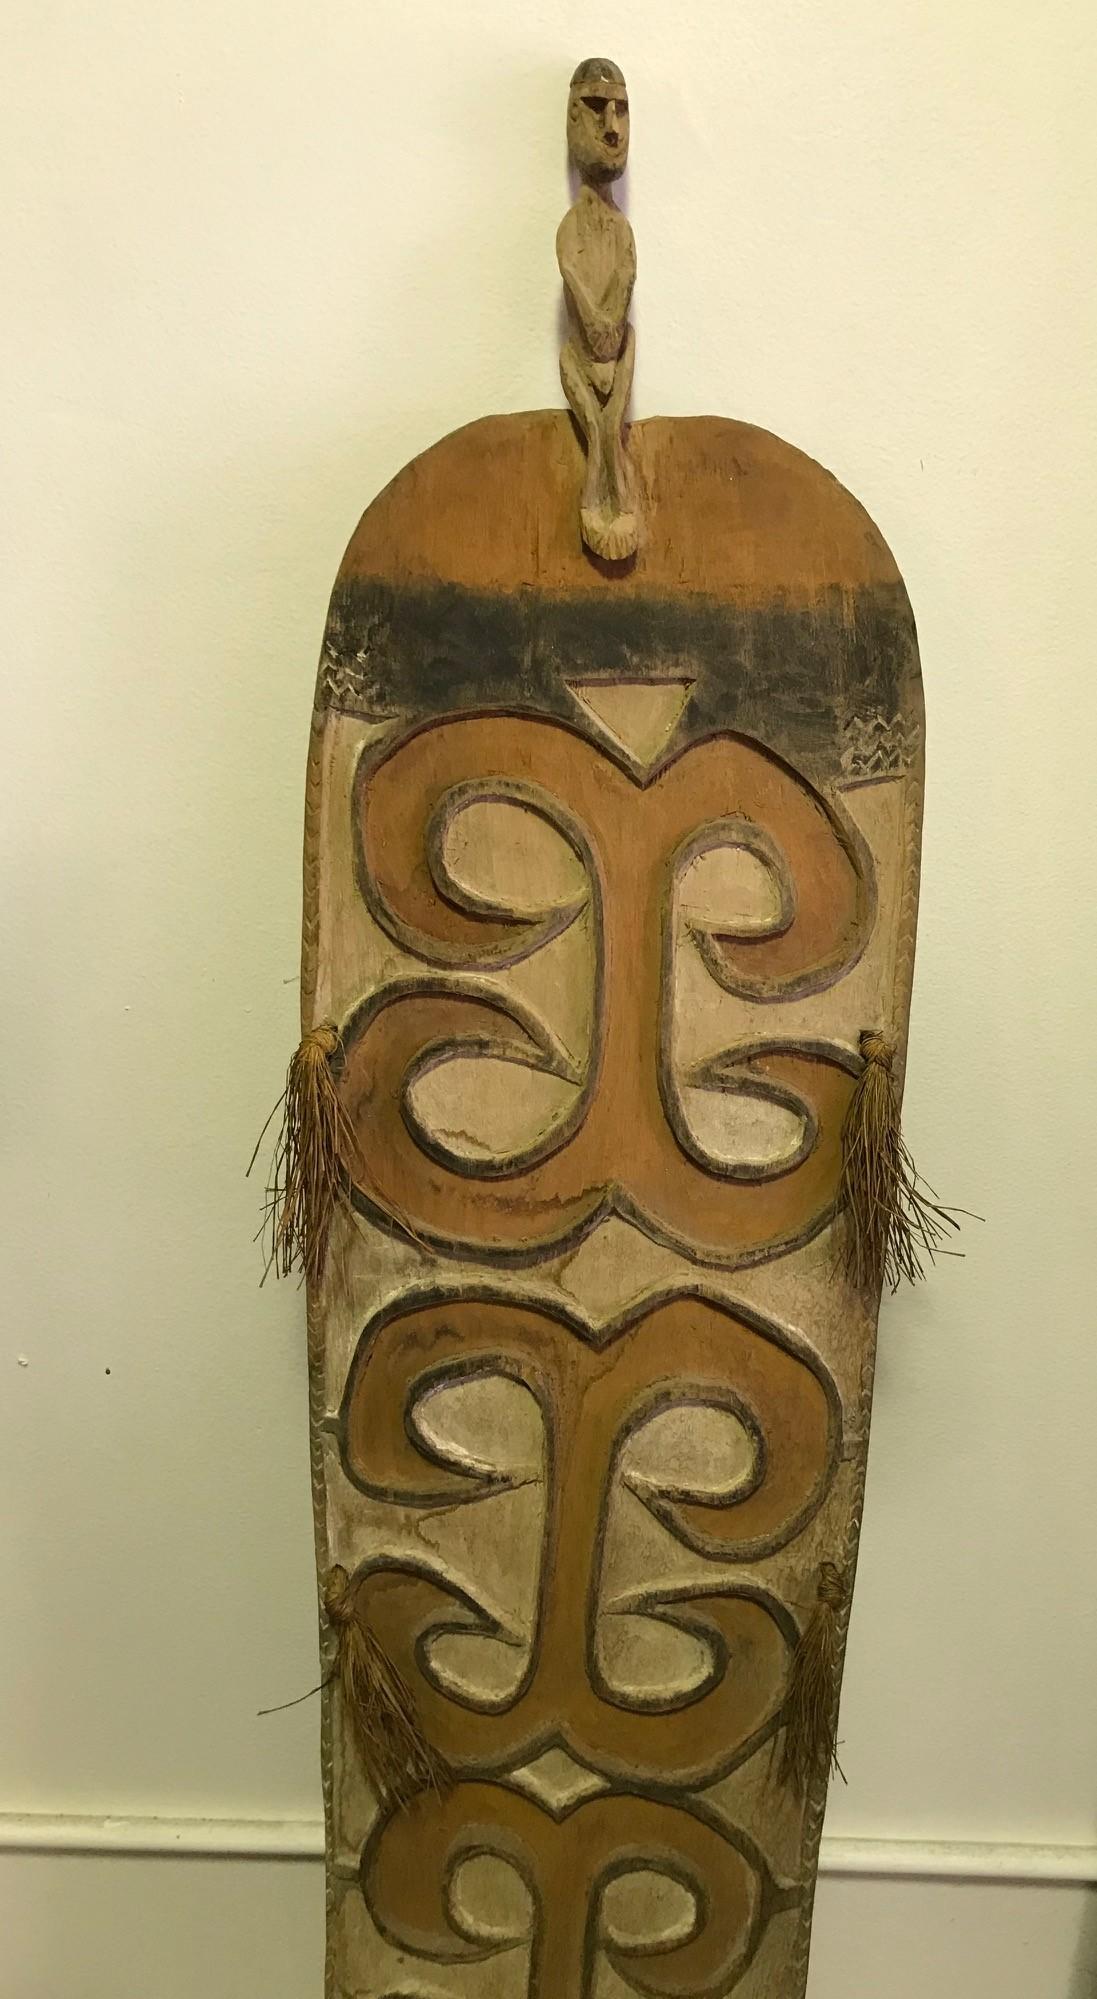 An incredible work by the Asmat people, a tribal people of New Guinea who currently reside in the Papua province of Indonesia. The Asmat peoples are one of the most well-known woodcarving tribes in the Pacific. Their art is highly sought after by